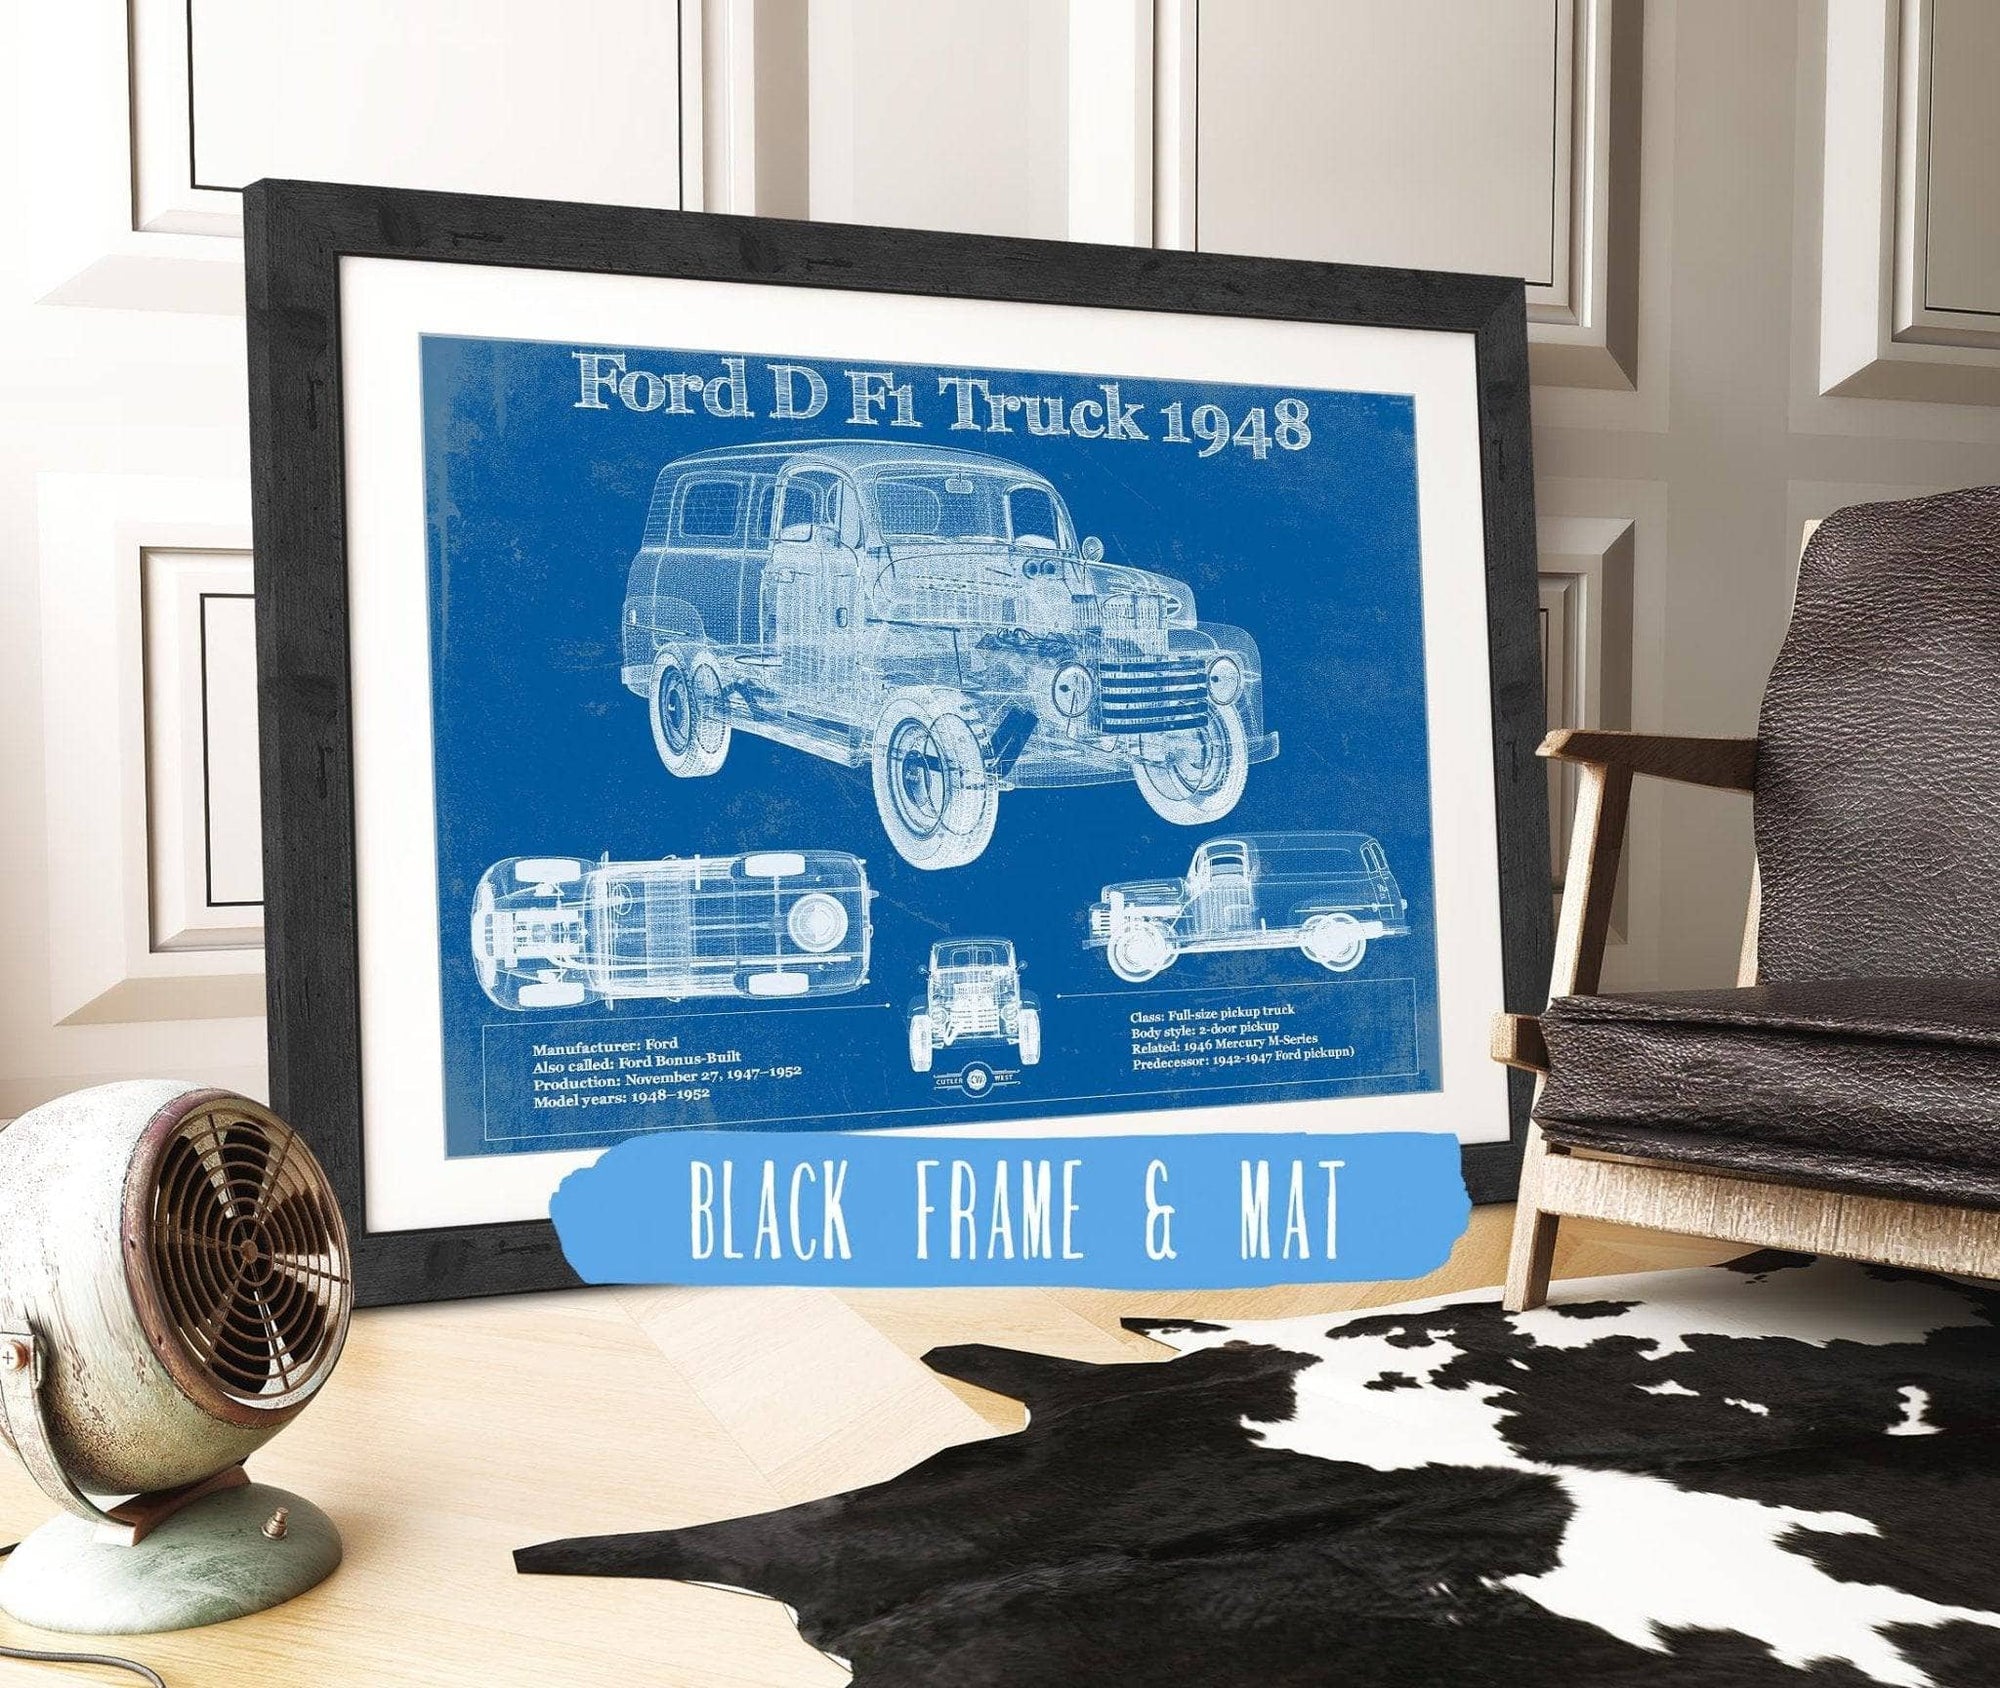 Cutler West Ford Collection 14" x 11" / Black Frame & Mat Ford D F1 1948 Truck Vintage Blueprint Auto Print 945000336